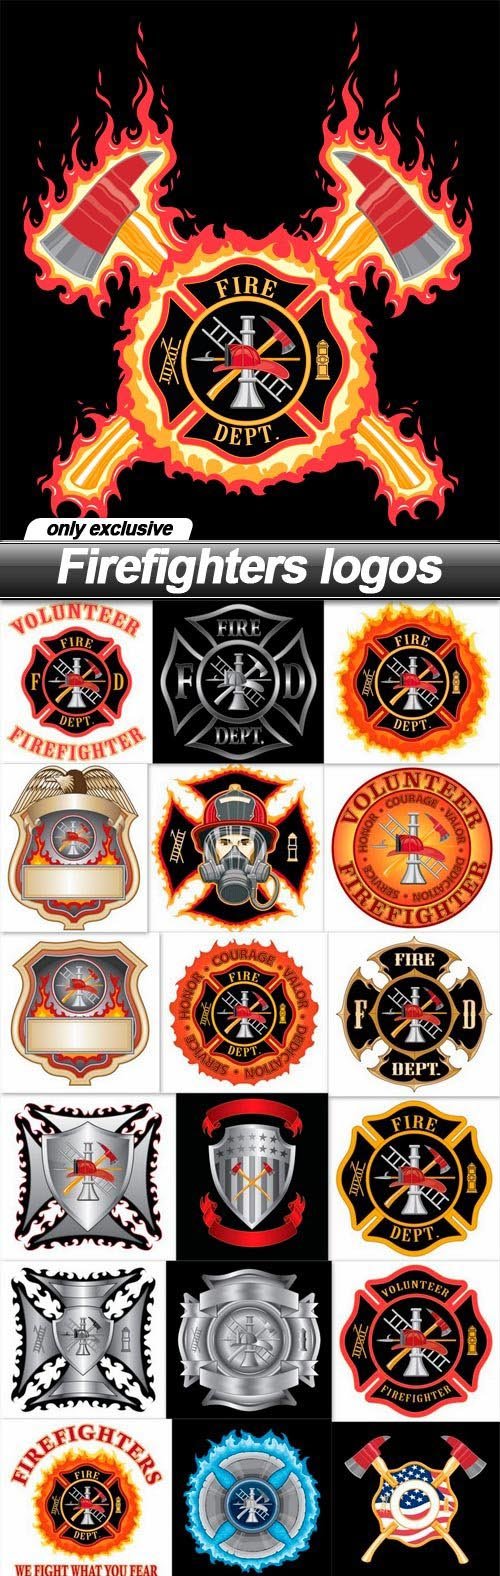 Firefighters logos - 25 EPS